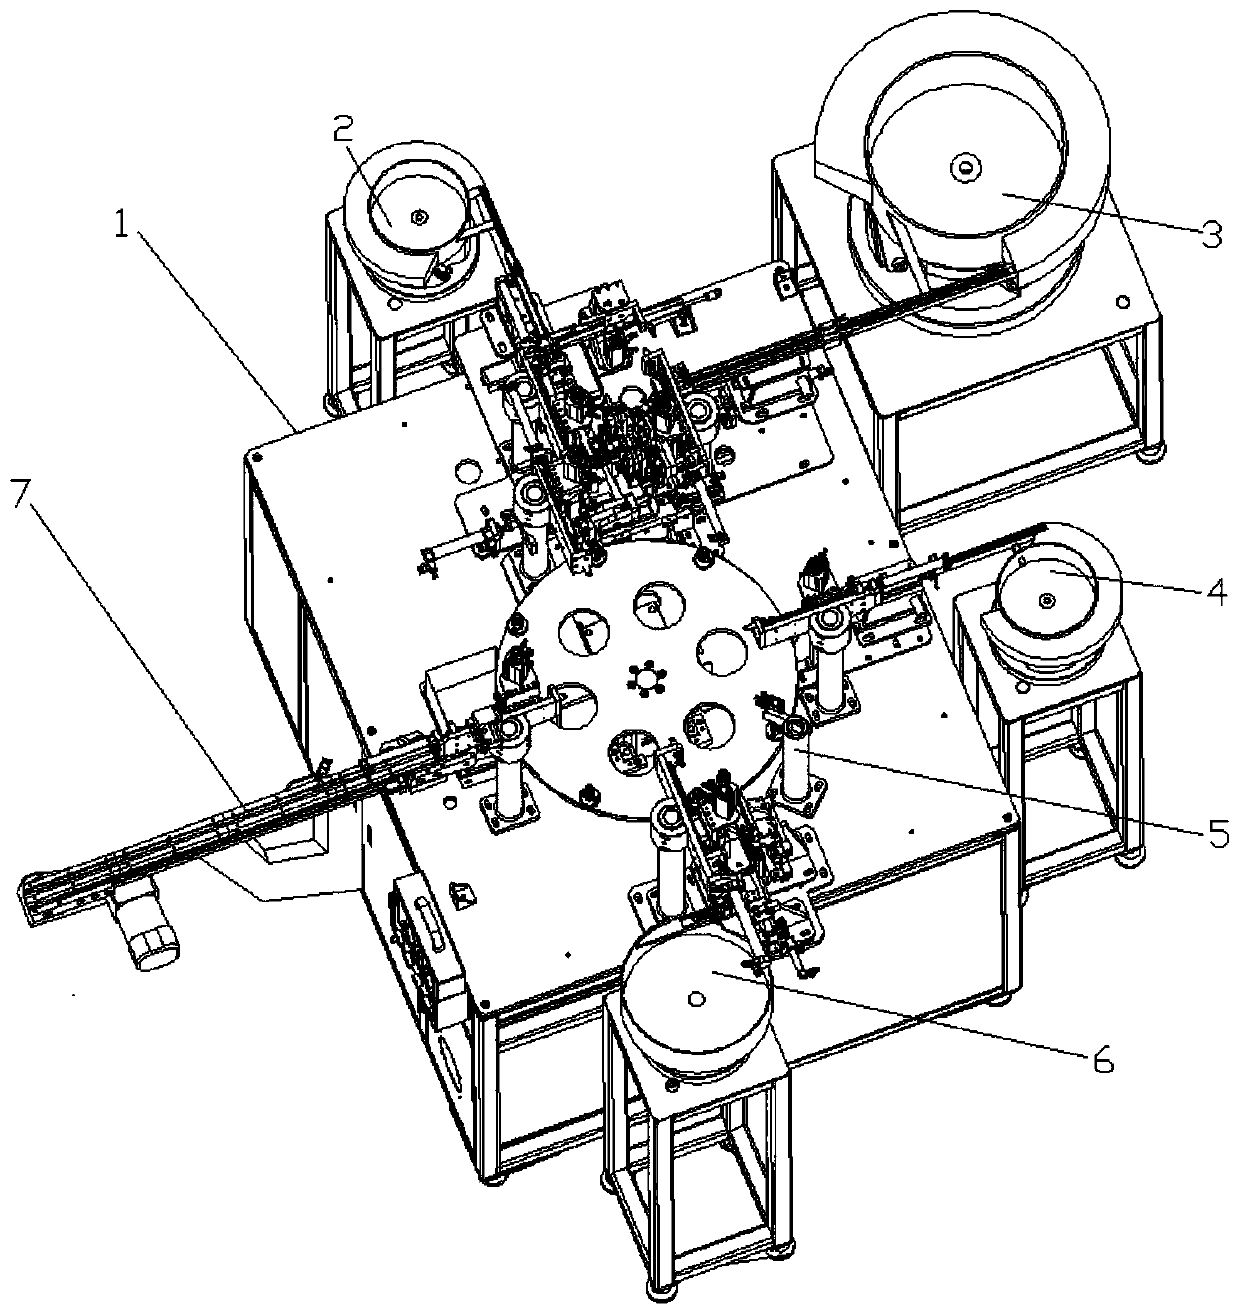 Full-automatic automobile valve assembly machine